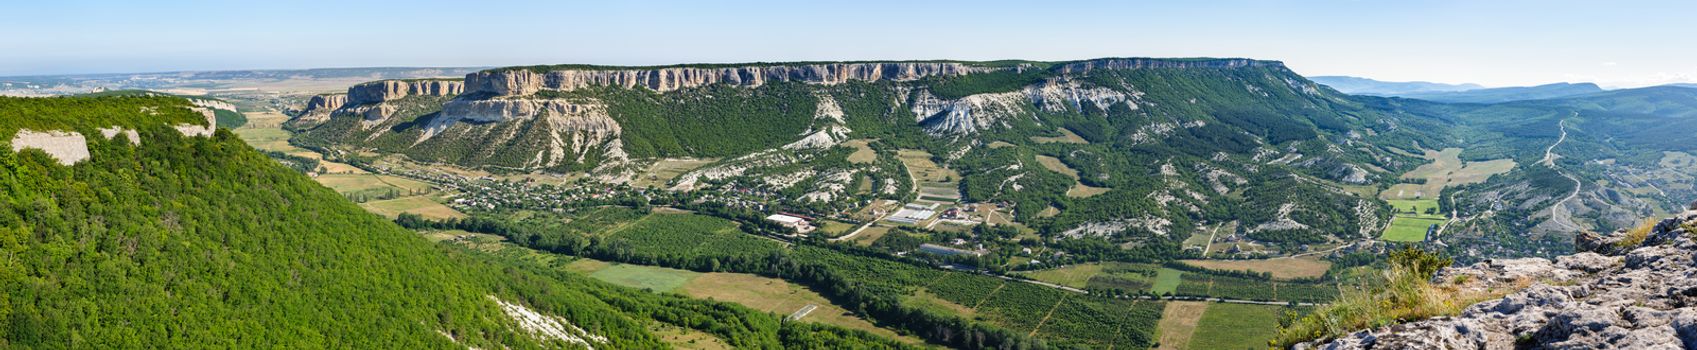 Panoramic very high resolution view from Burun Kaya cliff to Belbek Canyon Valley, Crimea, Ukraine or Russia